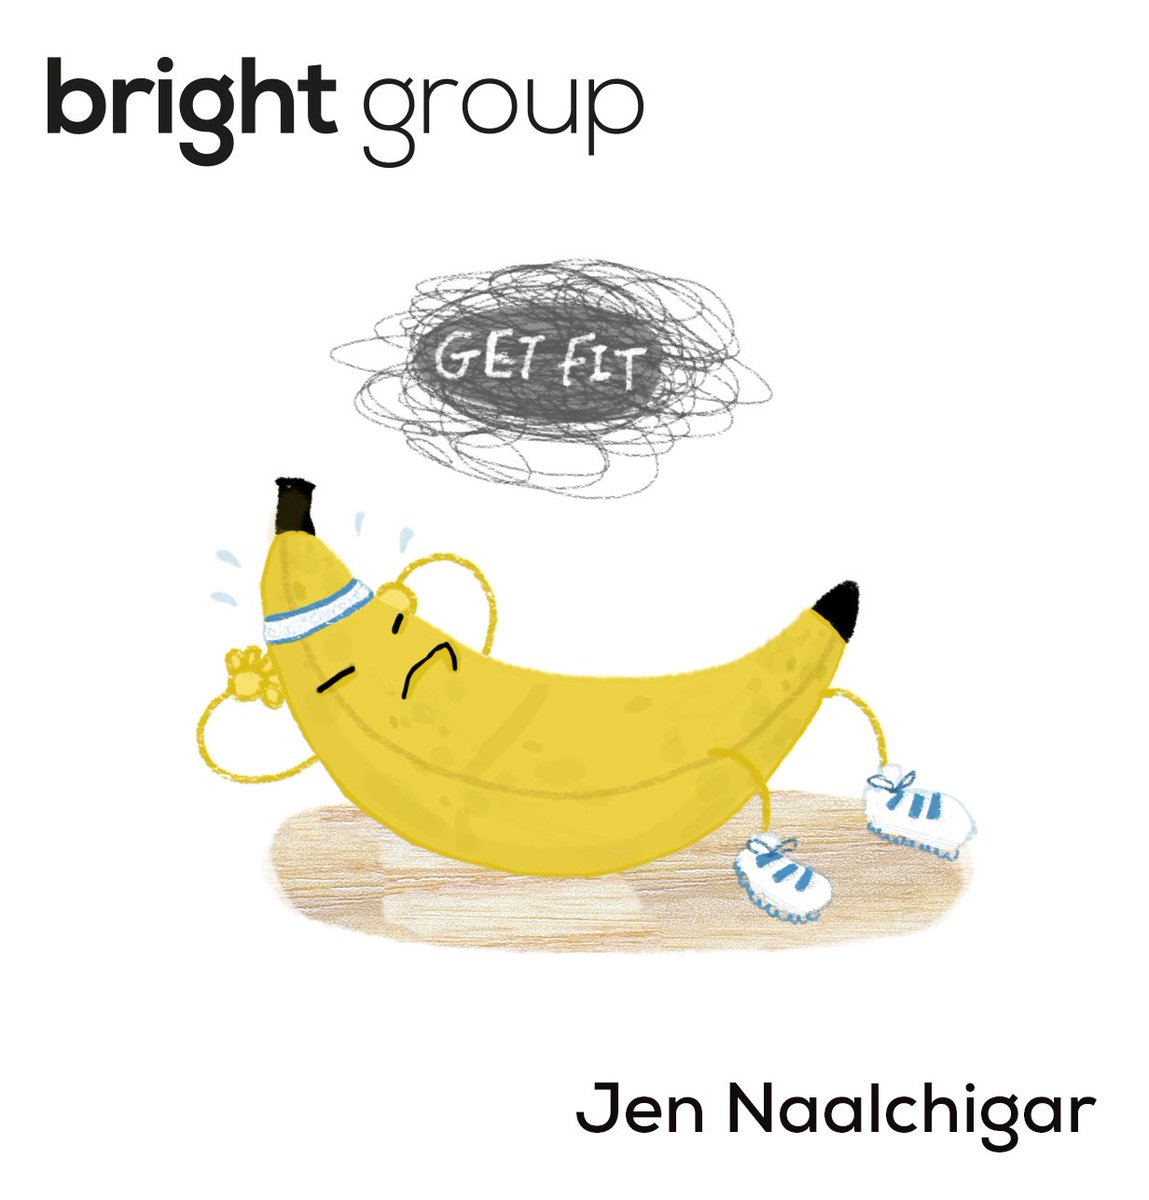 #Happy New Year! It's #day1 of a brand #newyear and this banana has the best of intentions! Thanks to @naalchidraws